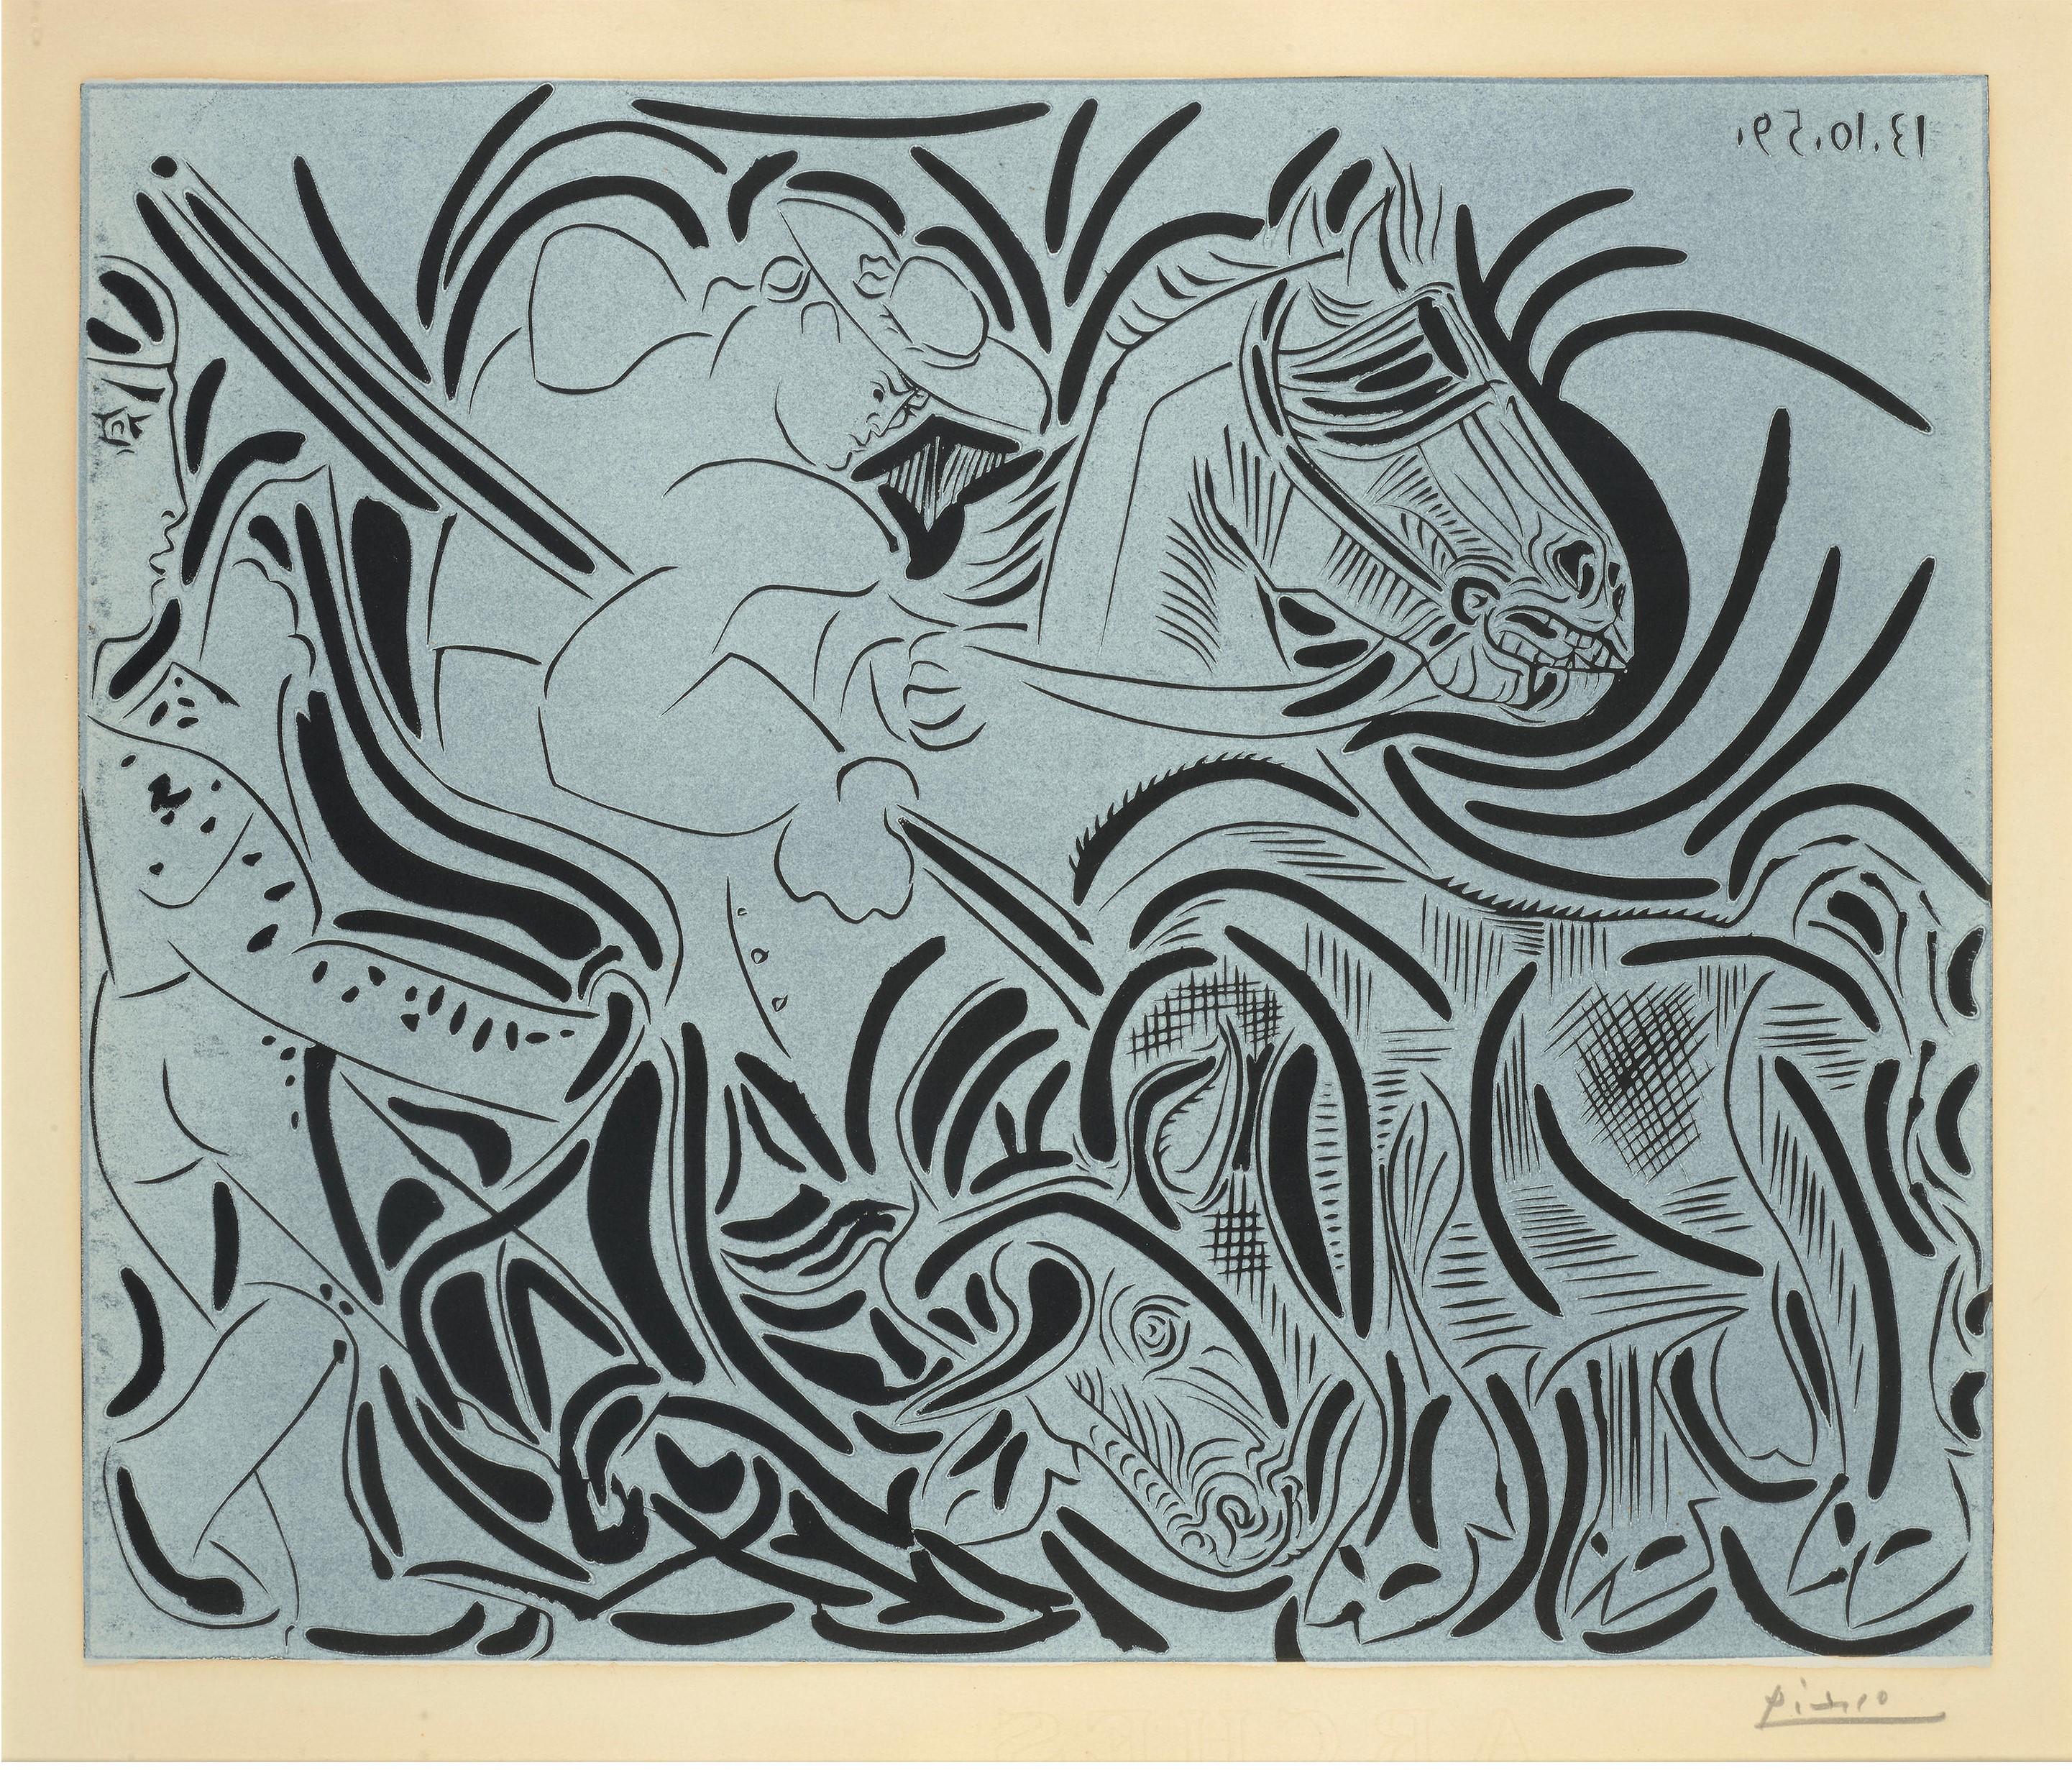 The Following Item we are Offering is A Magnificent Rare Important Original Pablo Picasso Linocut in Light Blue and Black colors on Arches paper, handsigned in pencil on lower right and is numbered from a Rare Limited Edition of 50 numbered pieces